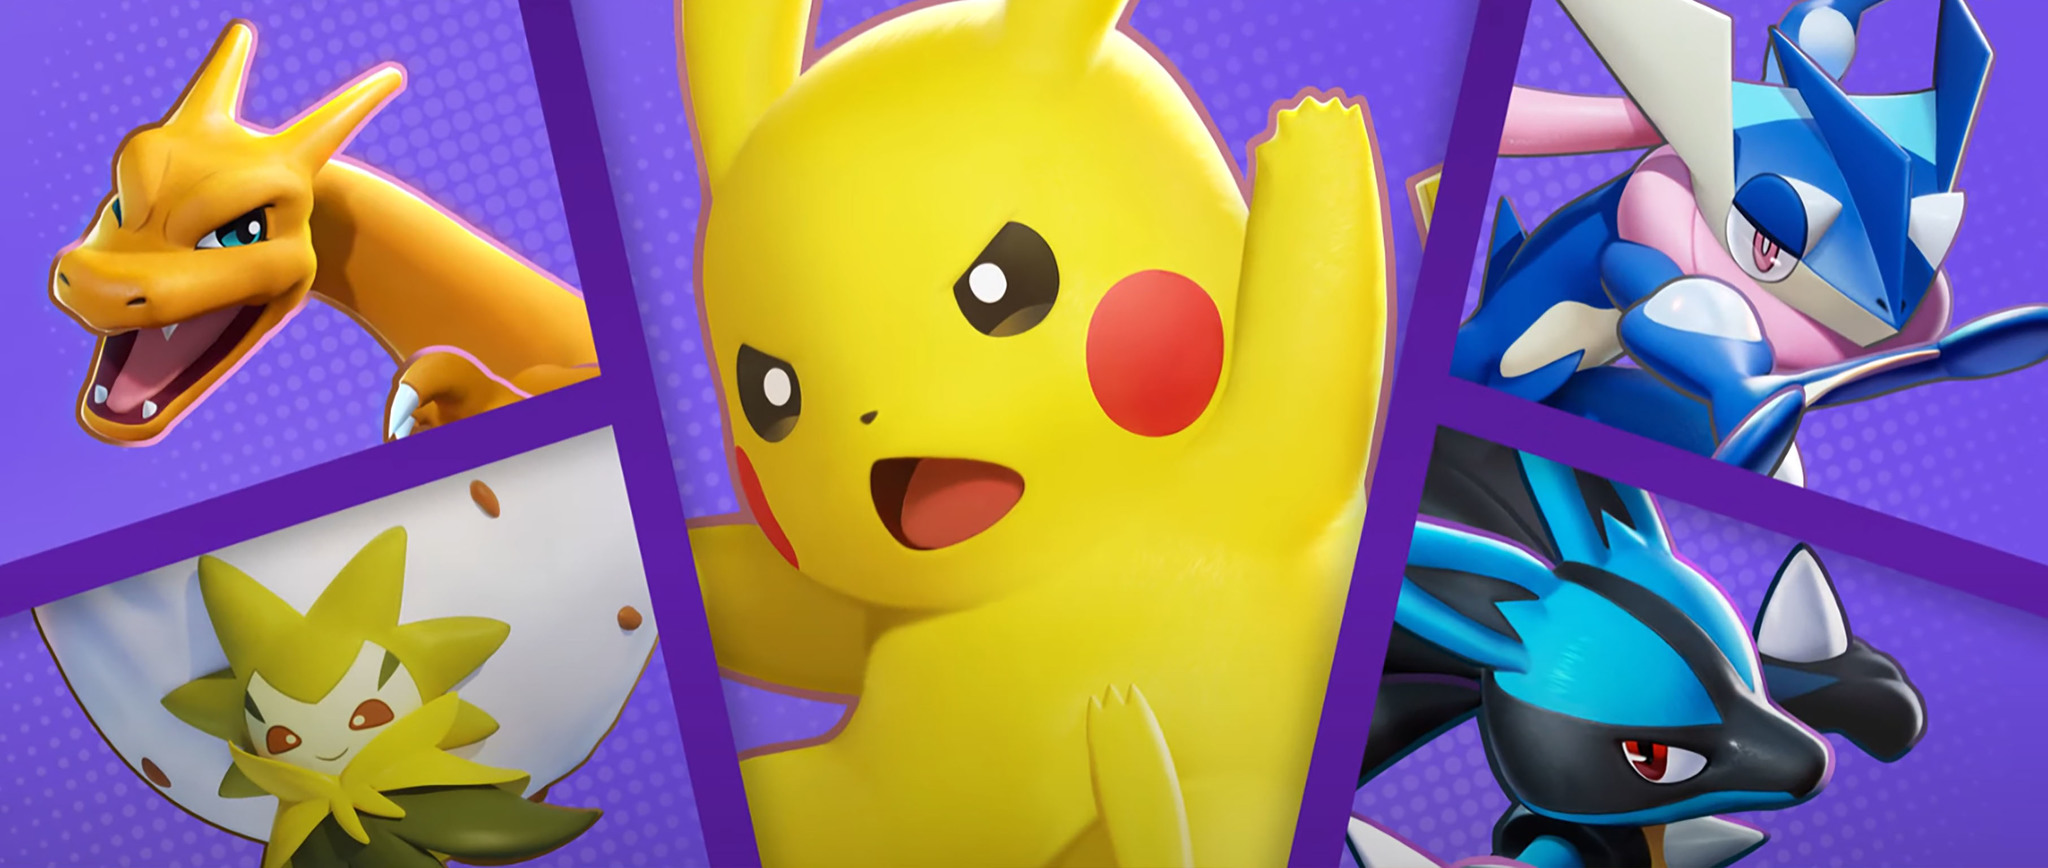 Pokémon Unite roster: All playable Pokémon characters, roles, and prices |  iMore